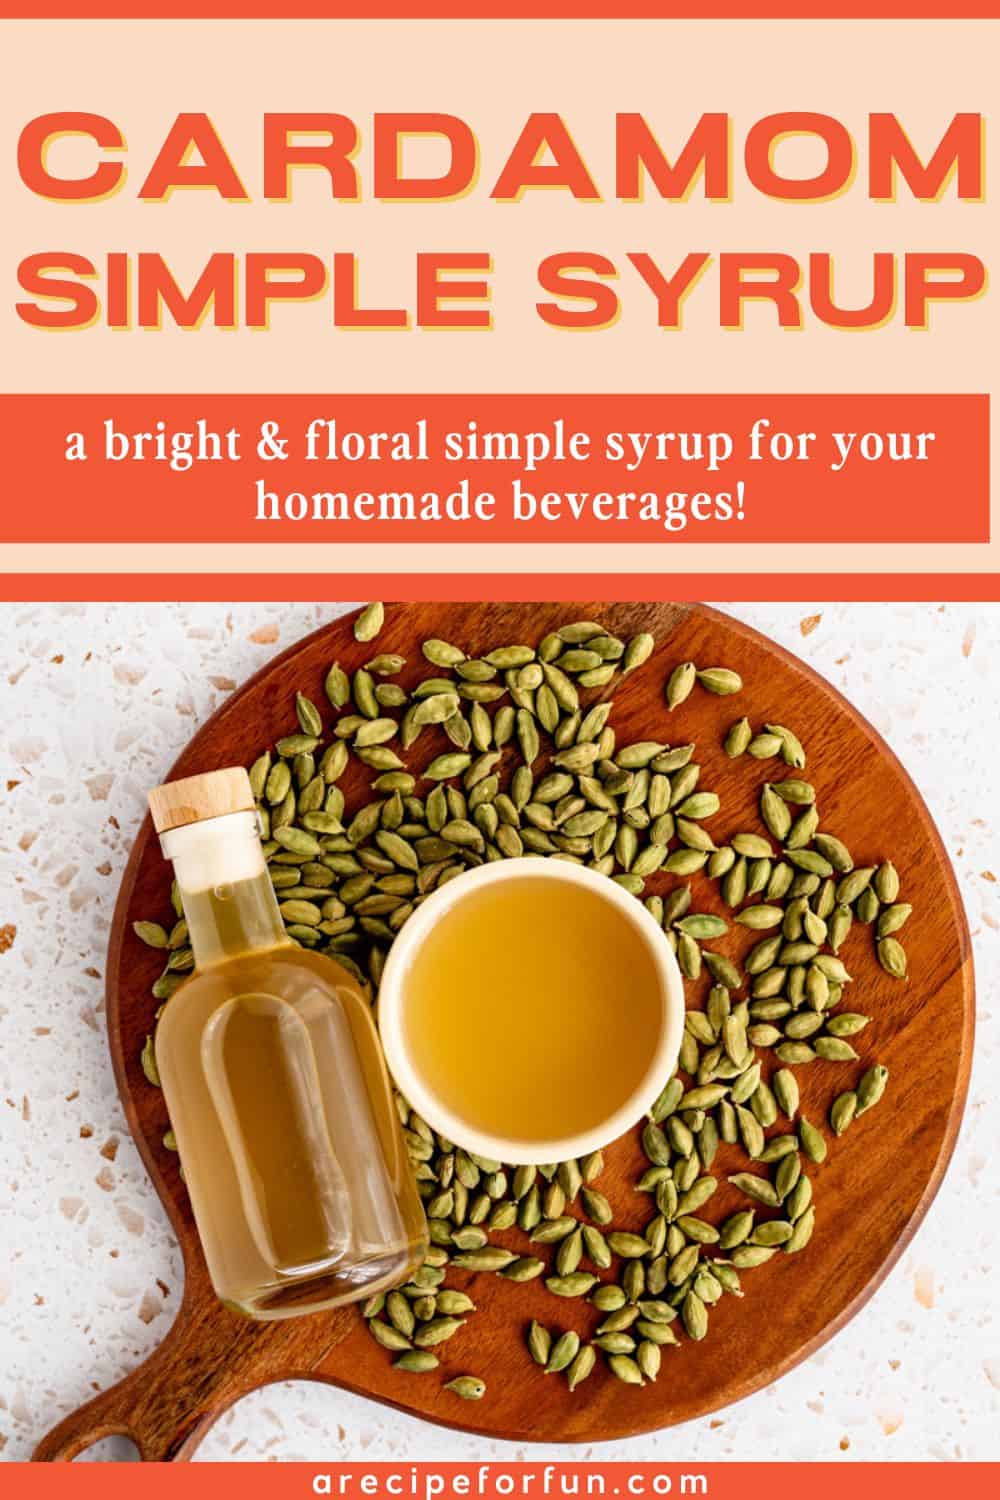 Pinterest Pin for a post about a recipe for a cardamom simple syrup.